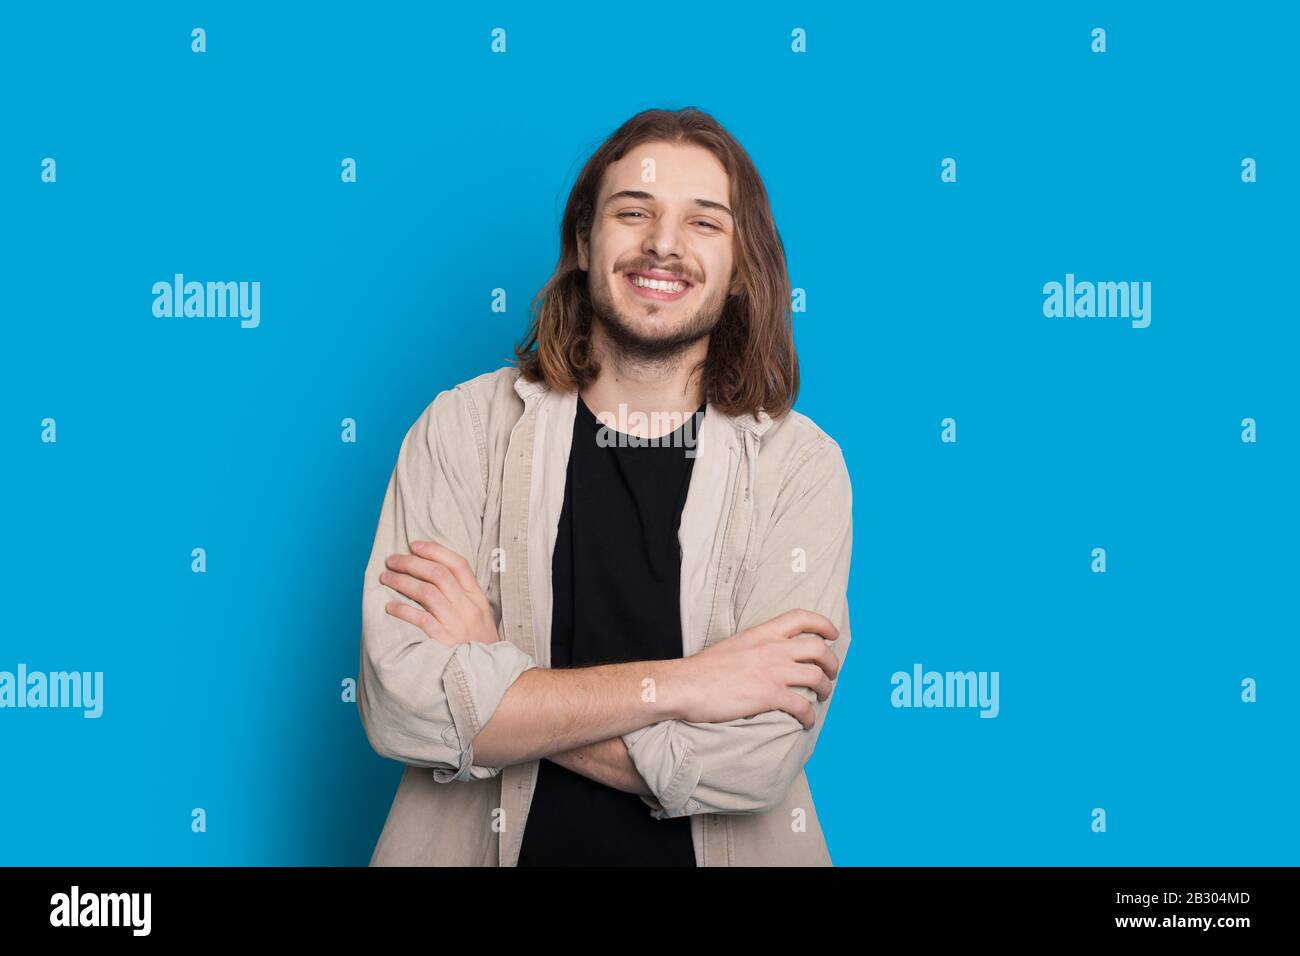 Confident caucasian man with long brown hair and beard is posing with crossed hands on a blue wall Stock Photo